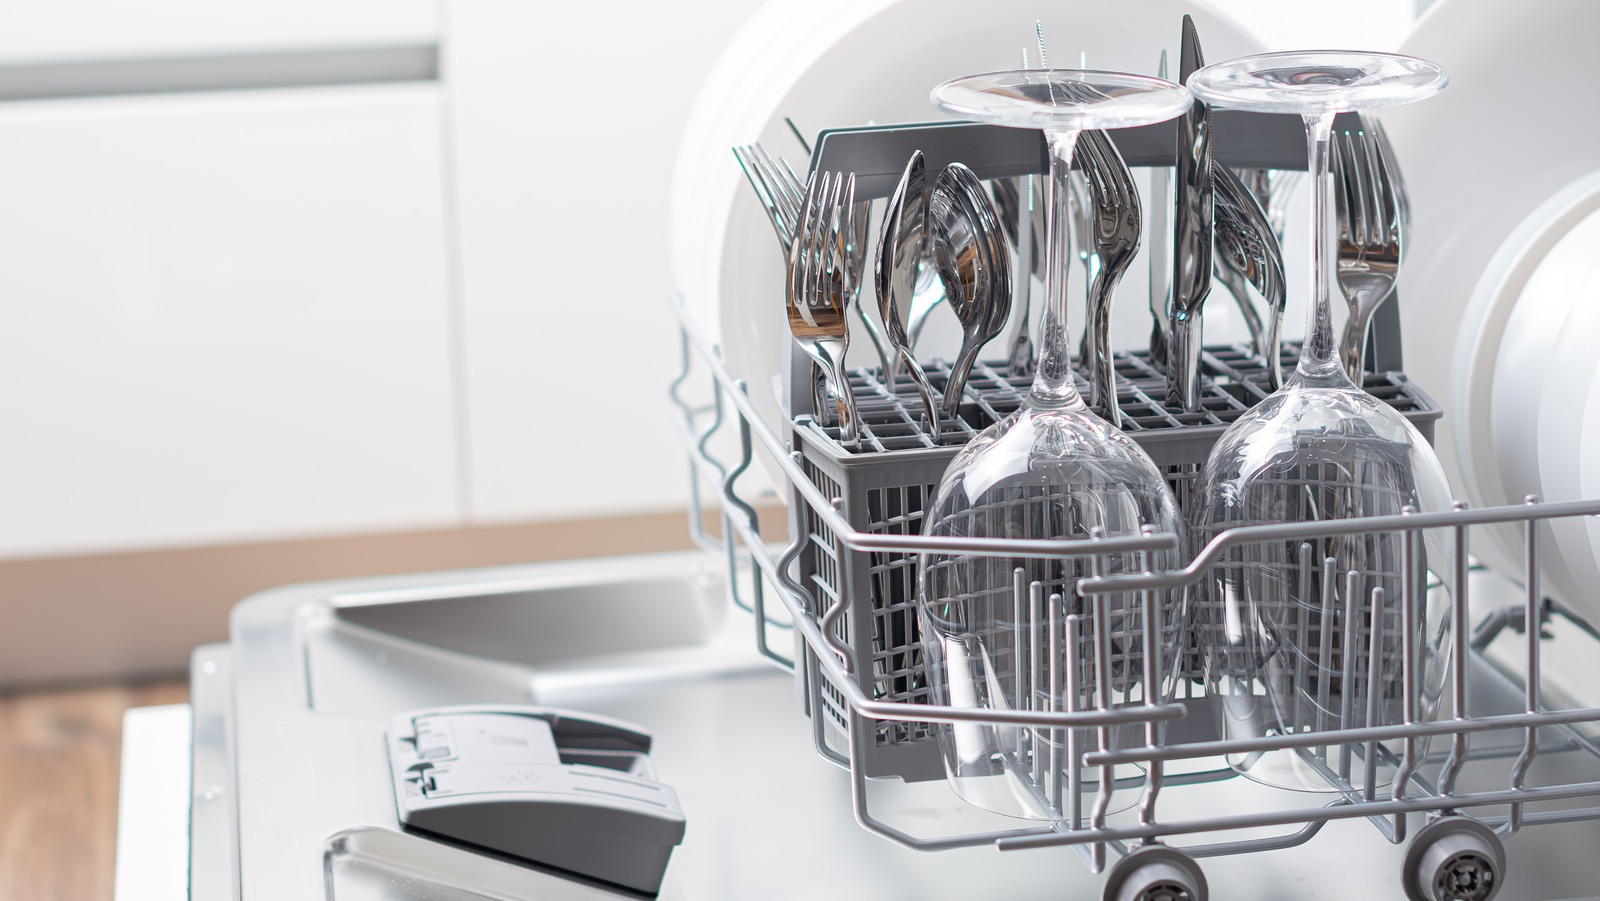 https://www.housedigest.com/img/gallery/heres-why-you-should-never-place-wine-glasses-in-the-dishwashers-bottom-rack/l-intro-1679414388.jpg